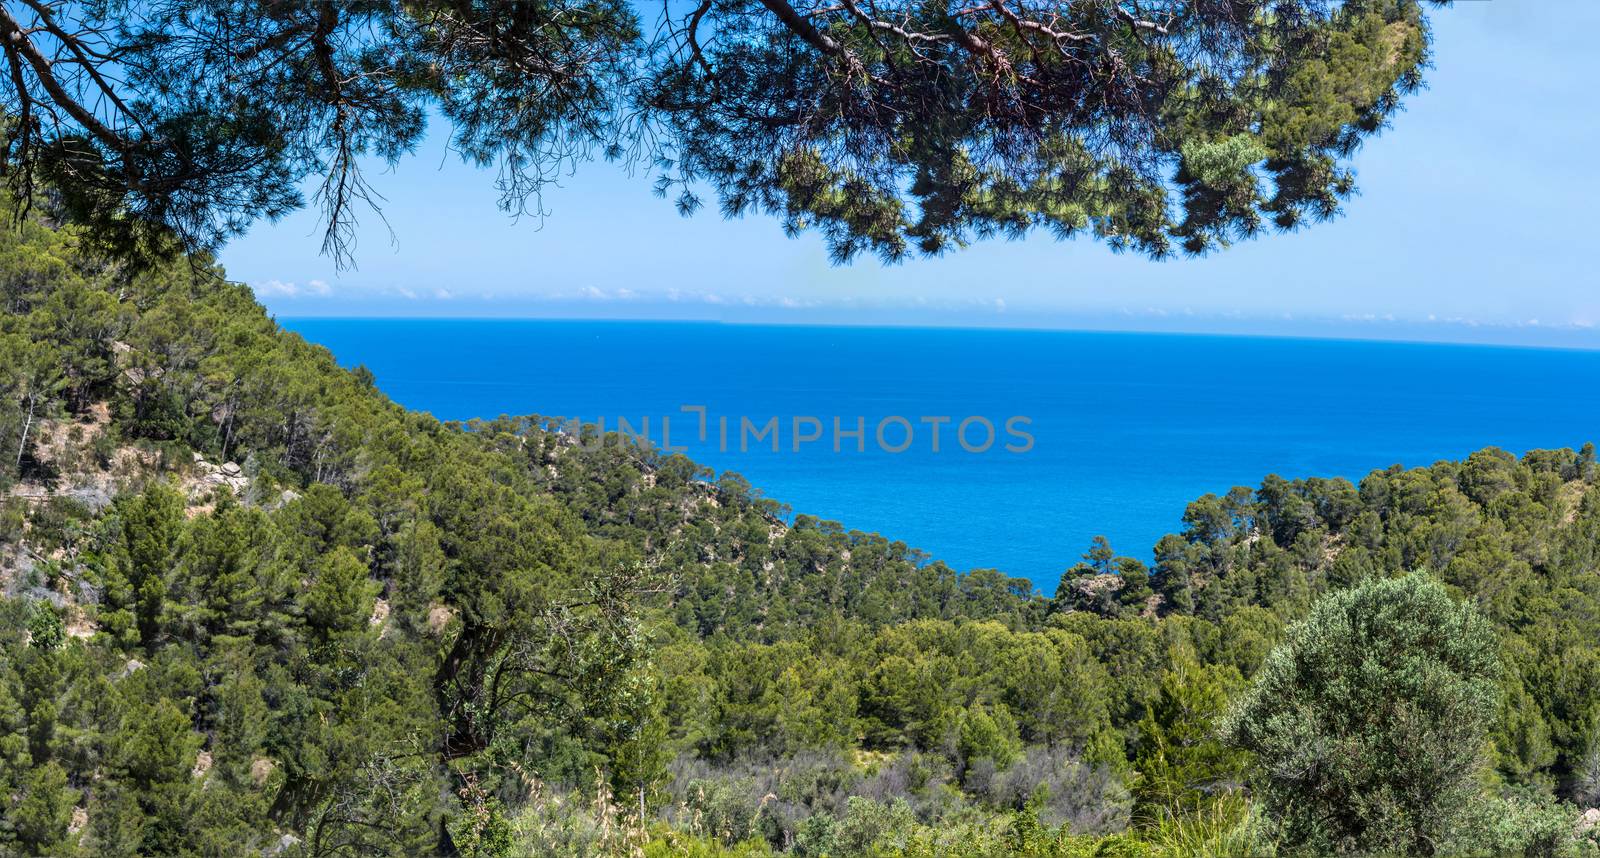 Panoramic view of the blue sea on the west coast of Mallorca, Spain.